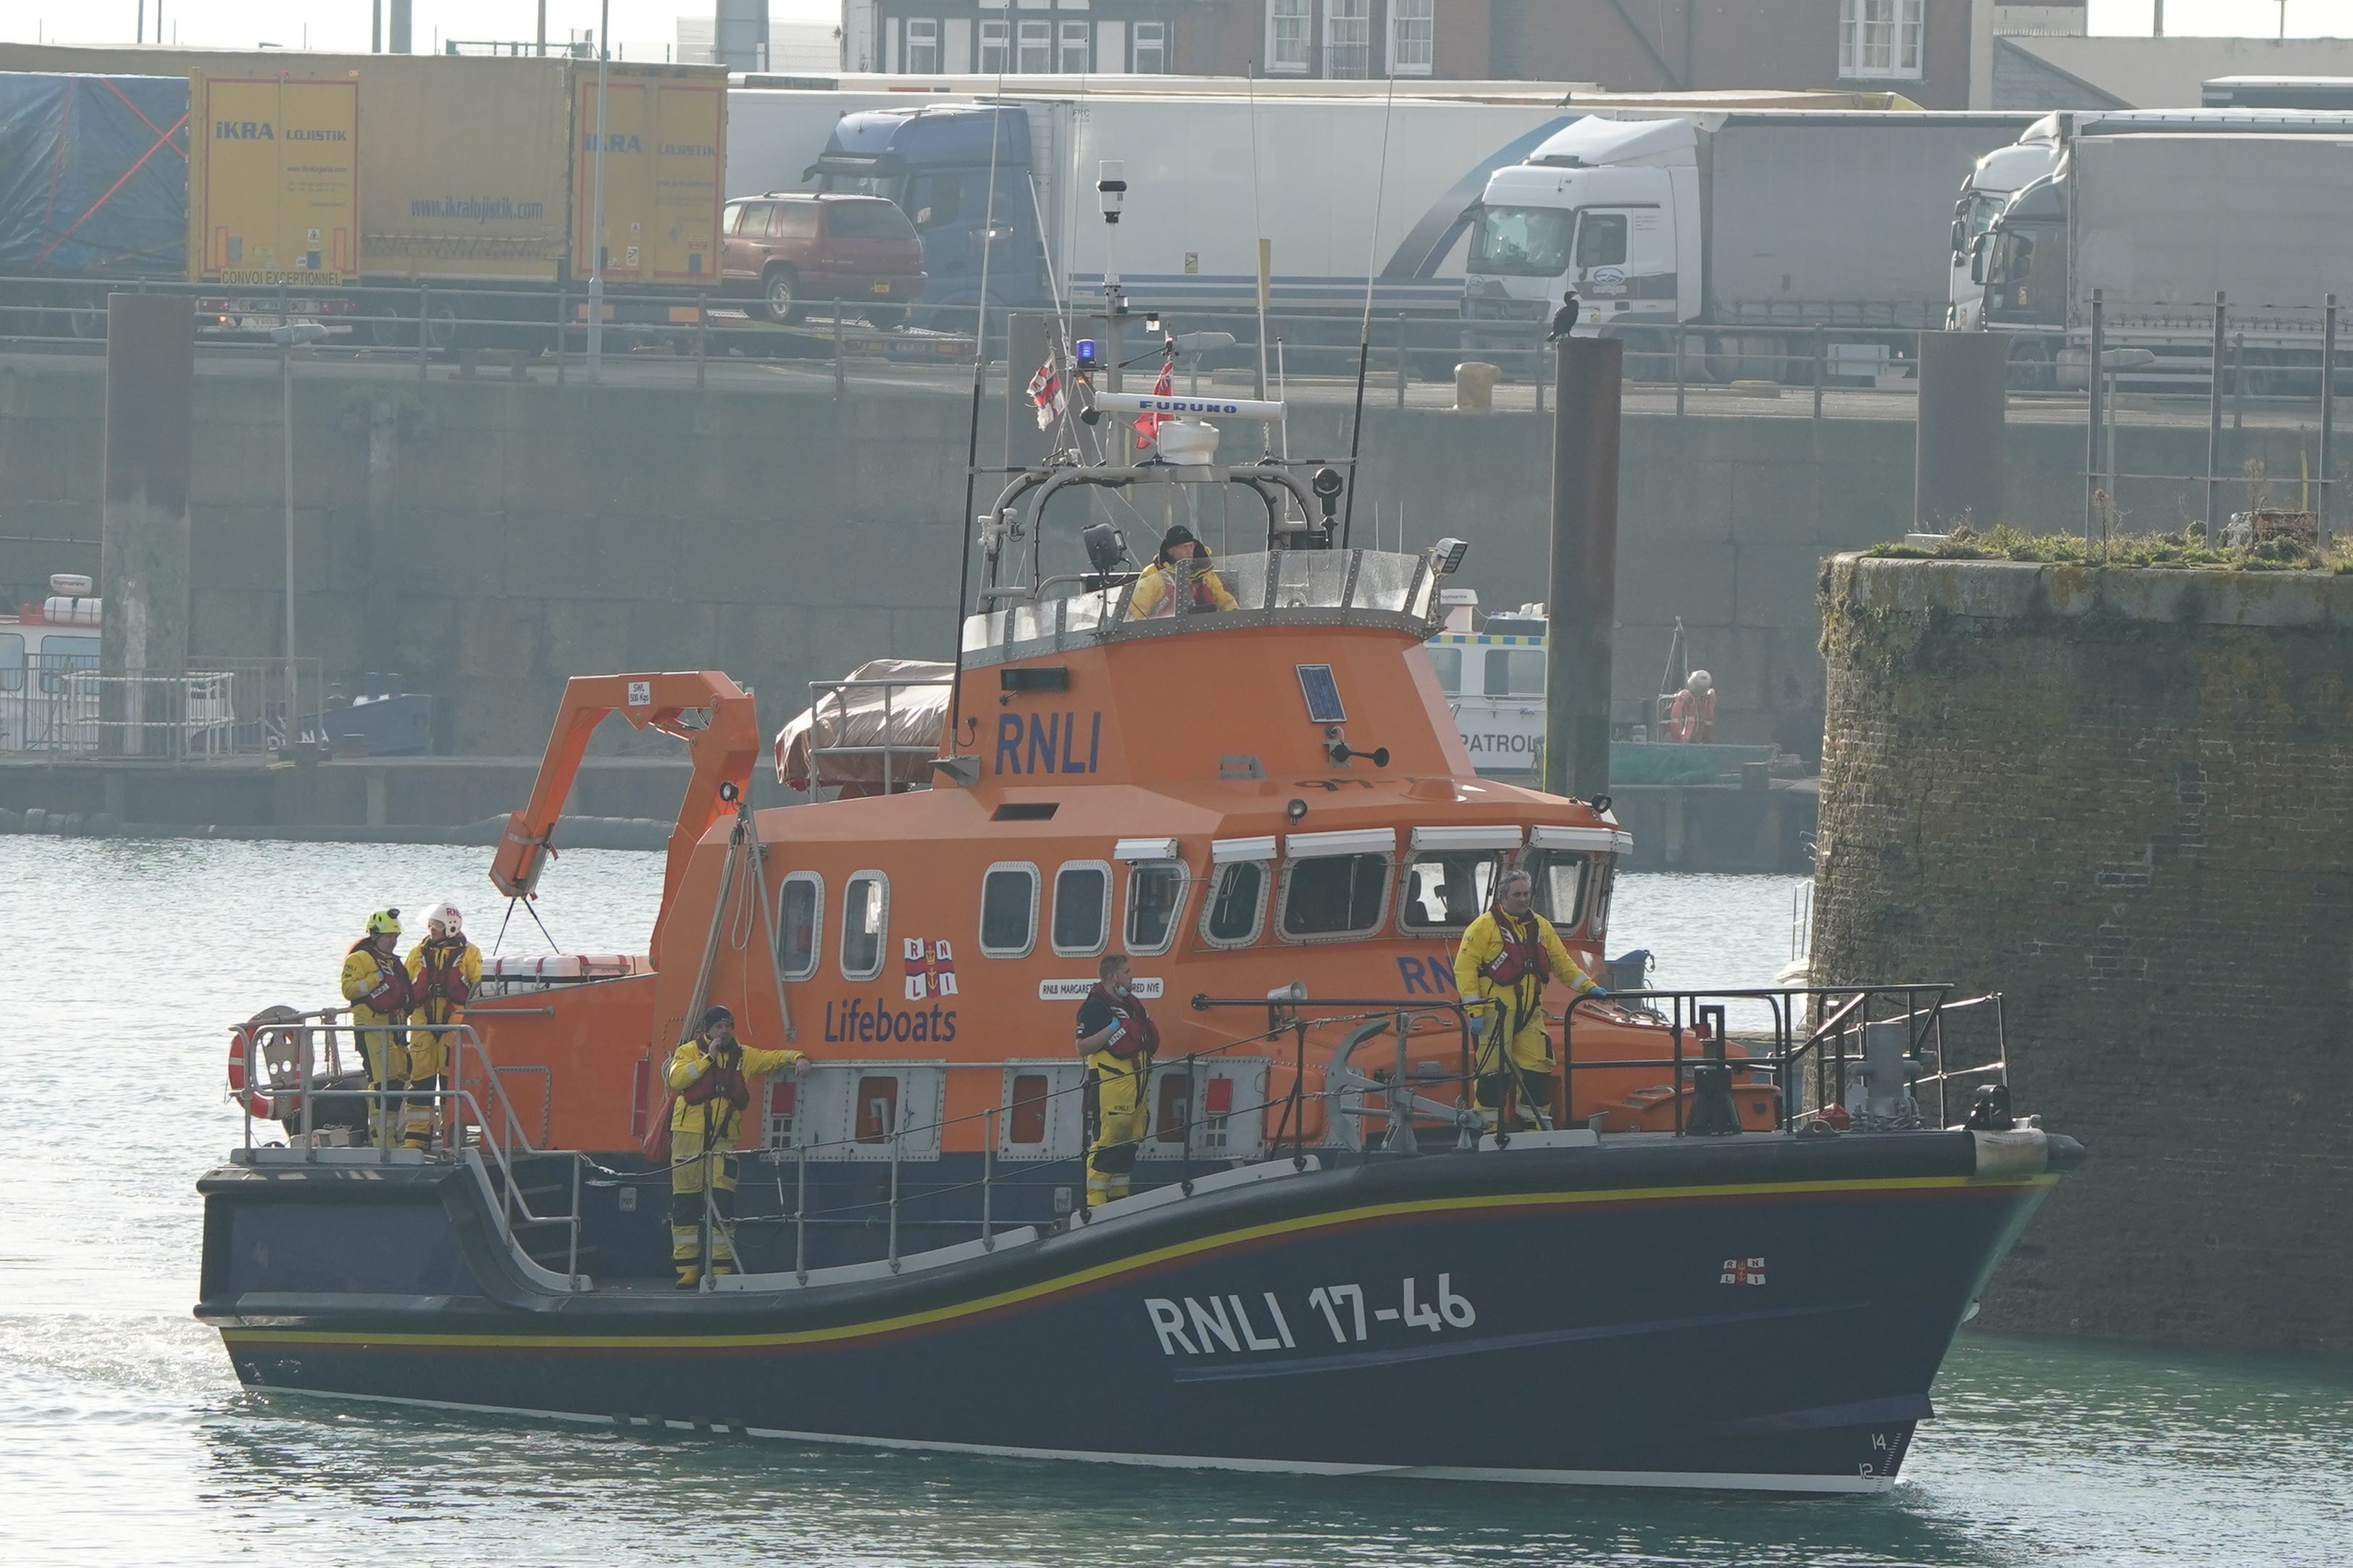 Lifeboat returns to the Port of Dover after a search and rescue operation